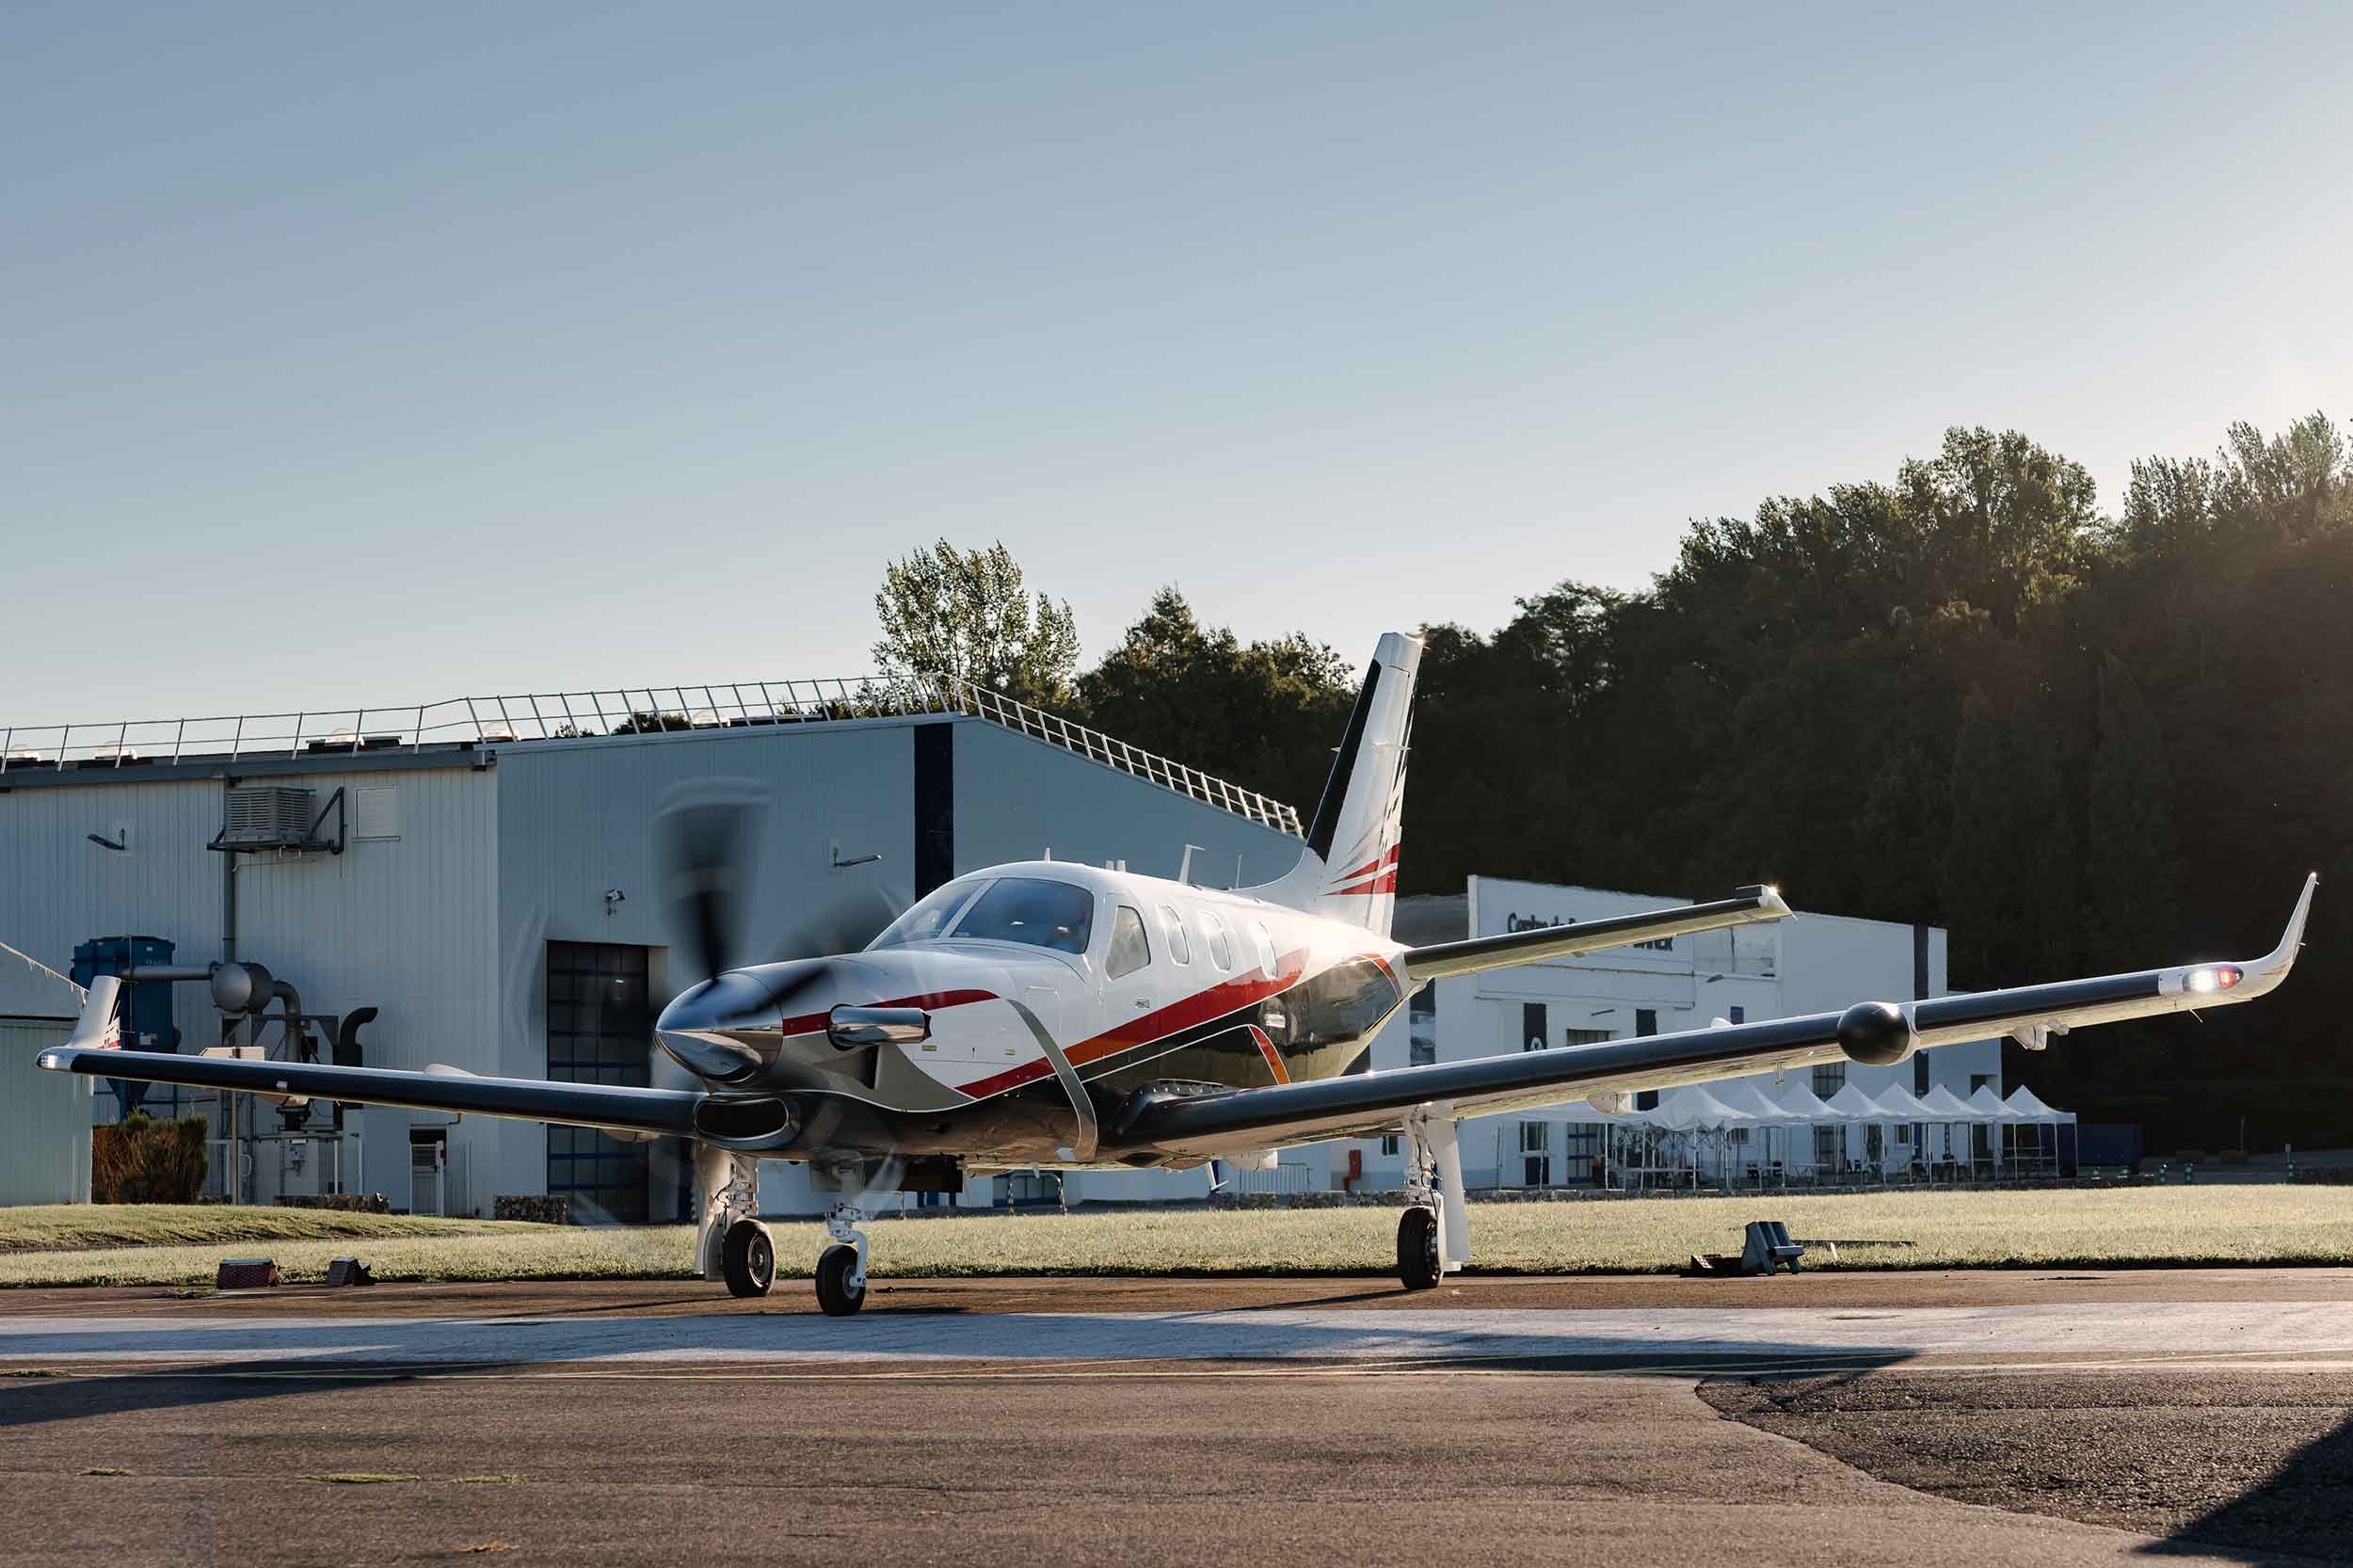 French manufacturer Daher has delivered 500 of its TBM 900-series aircraft – this is the 500th